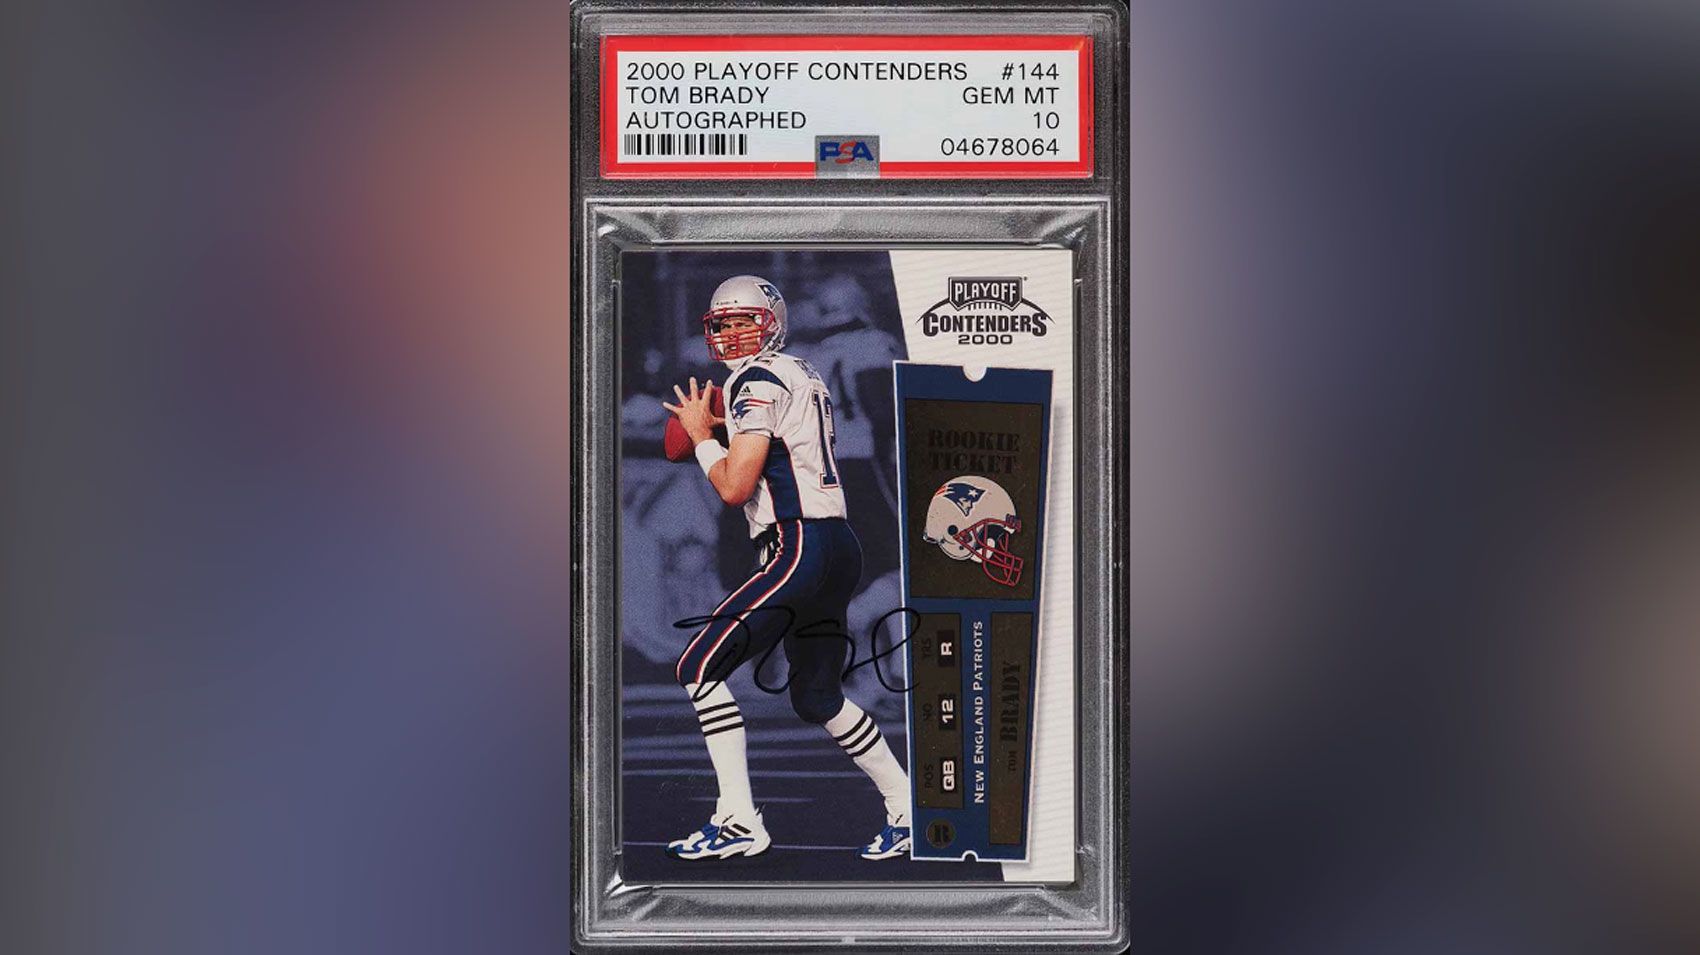 Tom Brady autographed rookie card auctioned for $555,988